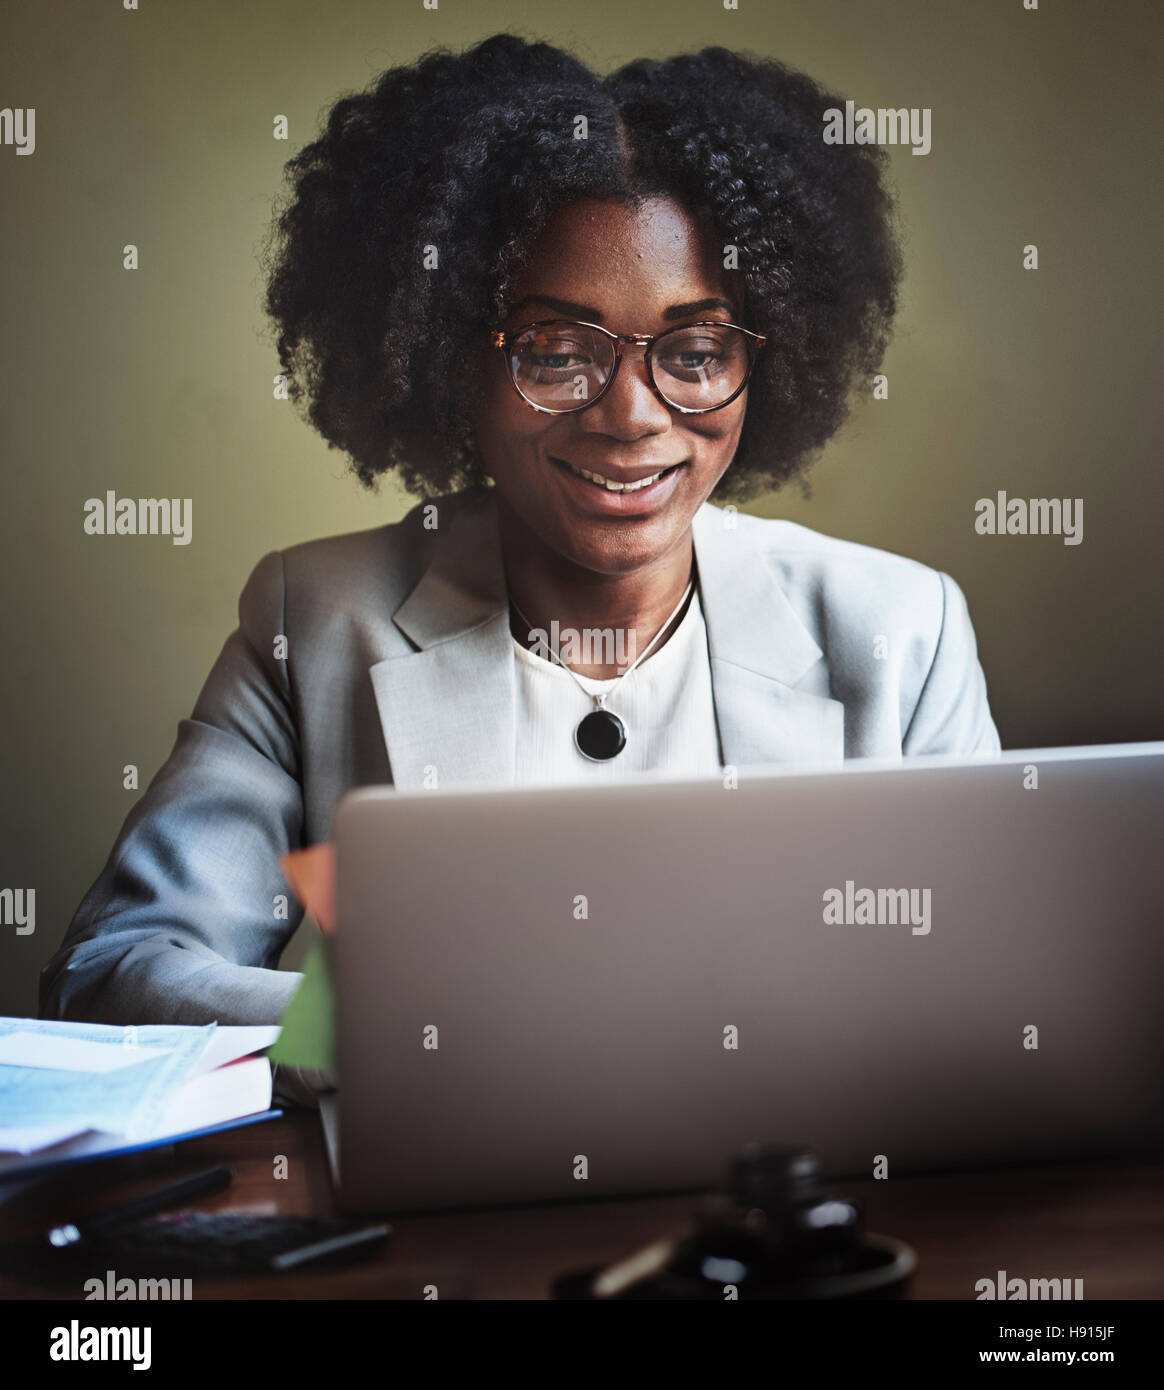 Businesswoman Working Computer Technology Concept Stock Photo